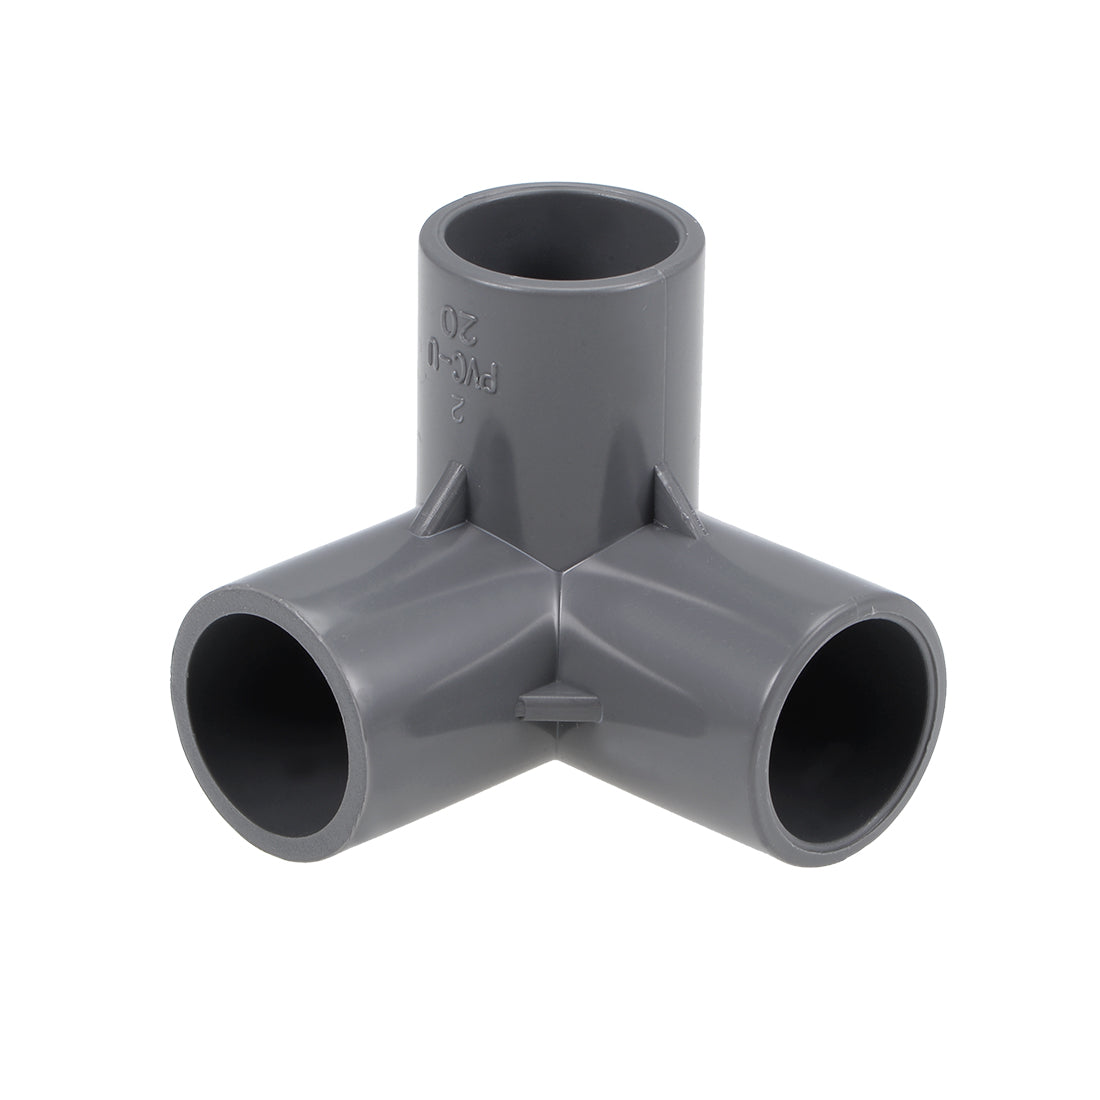 uxcell Uxcell 3-Way Elbow Metric PVC Fitting, 20mm Socket, Tee Corner Fittings Gray 10 Pcs